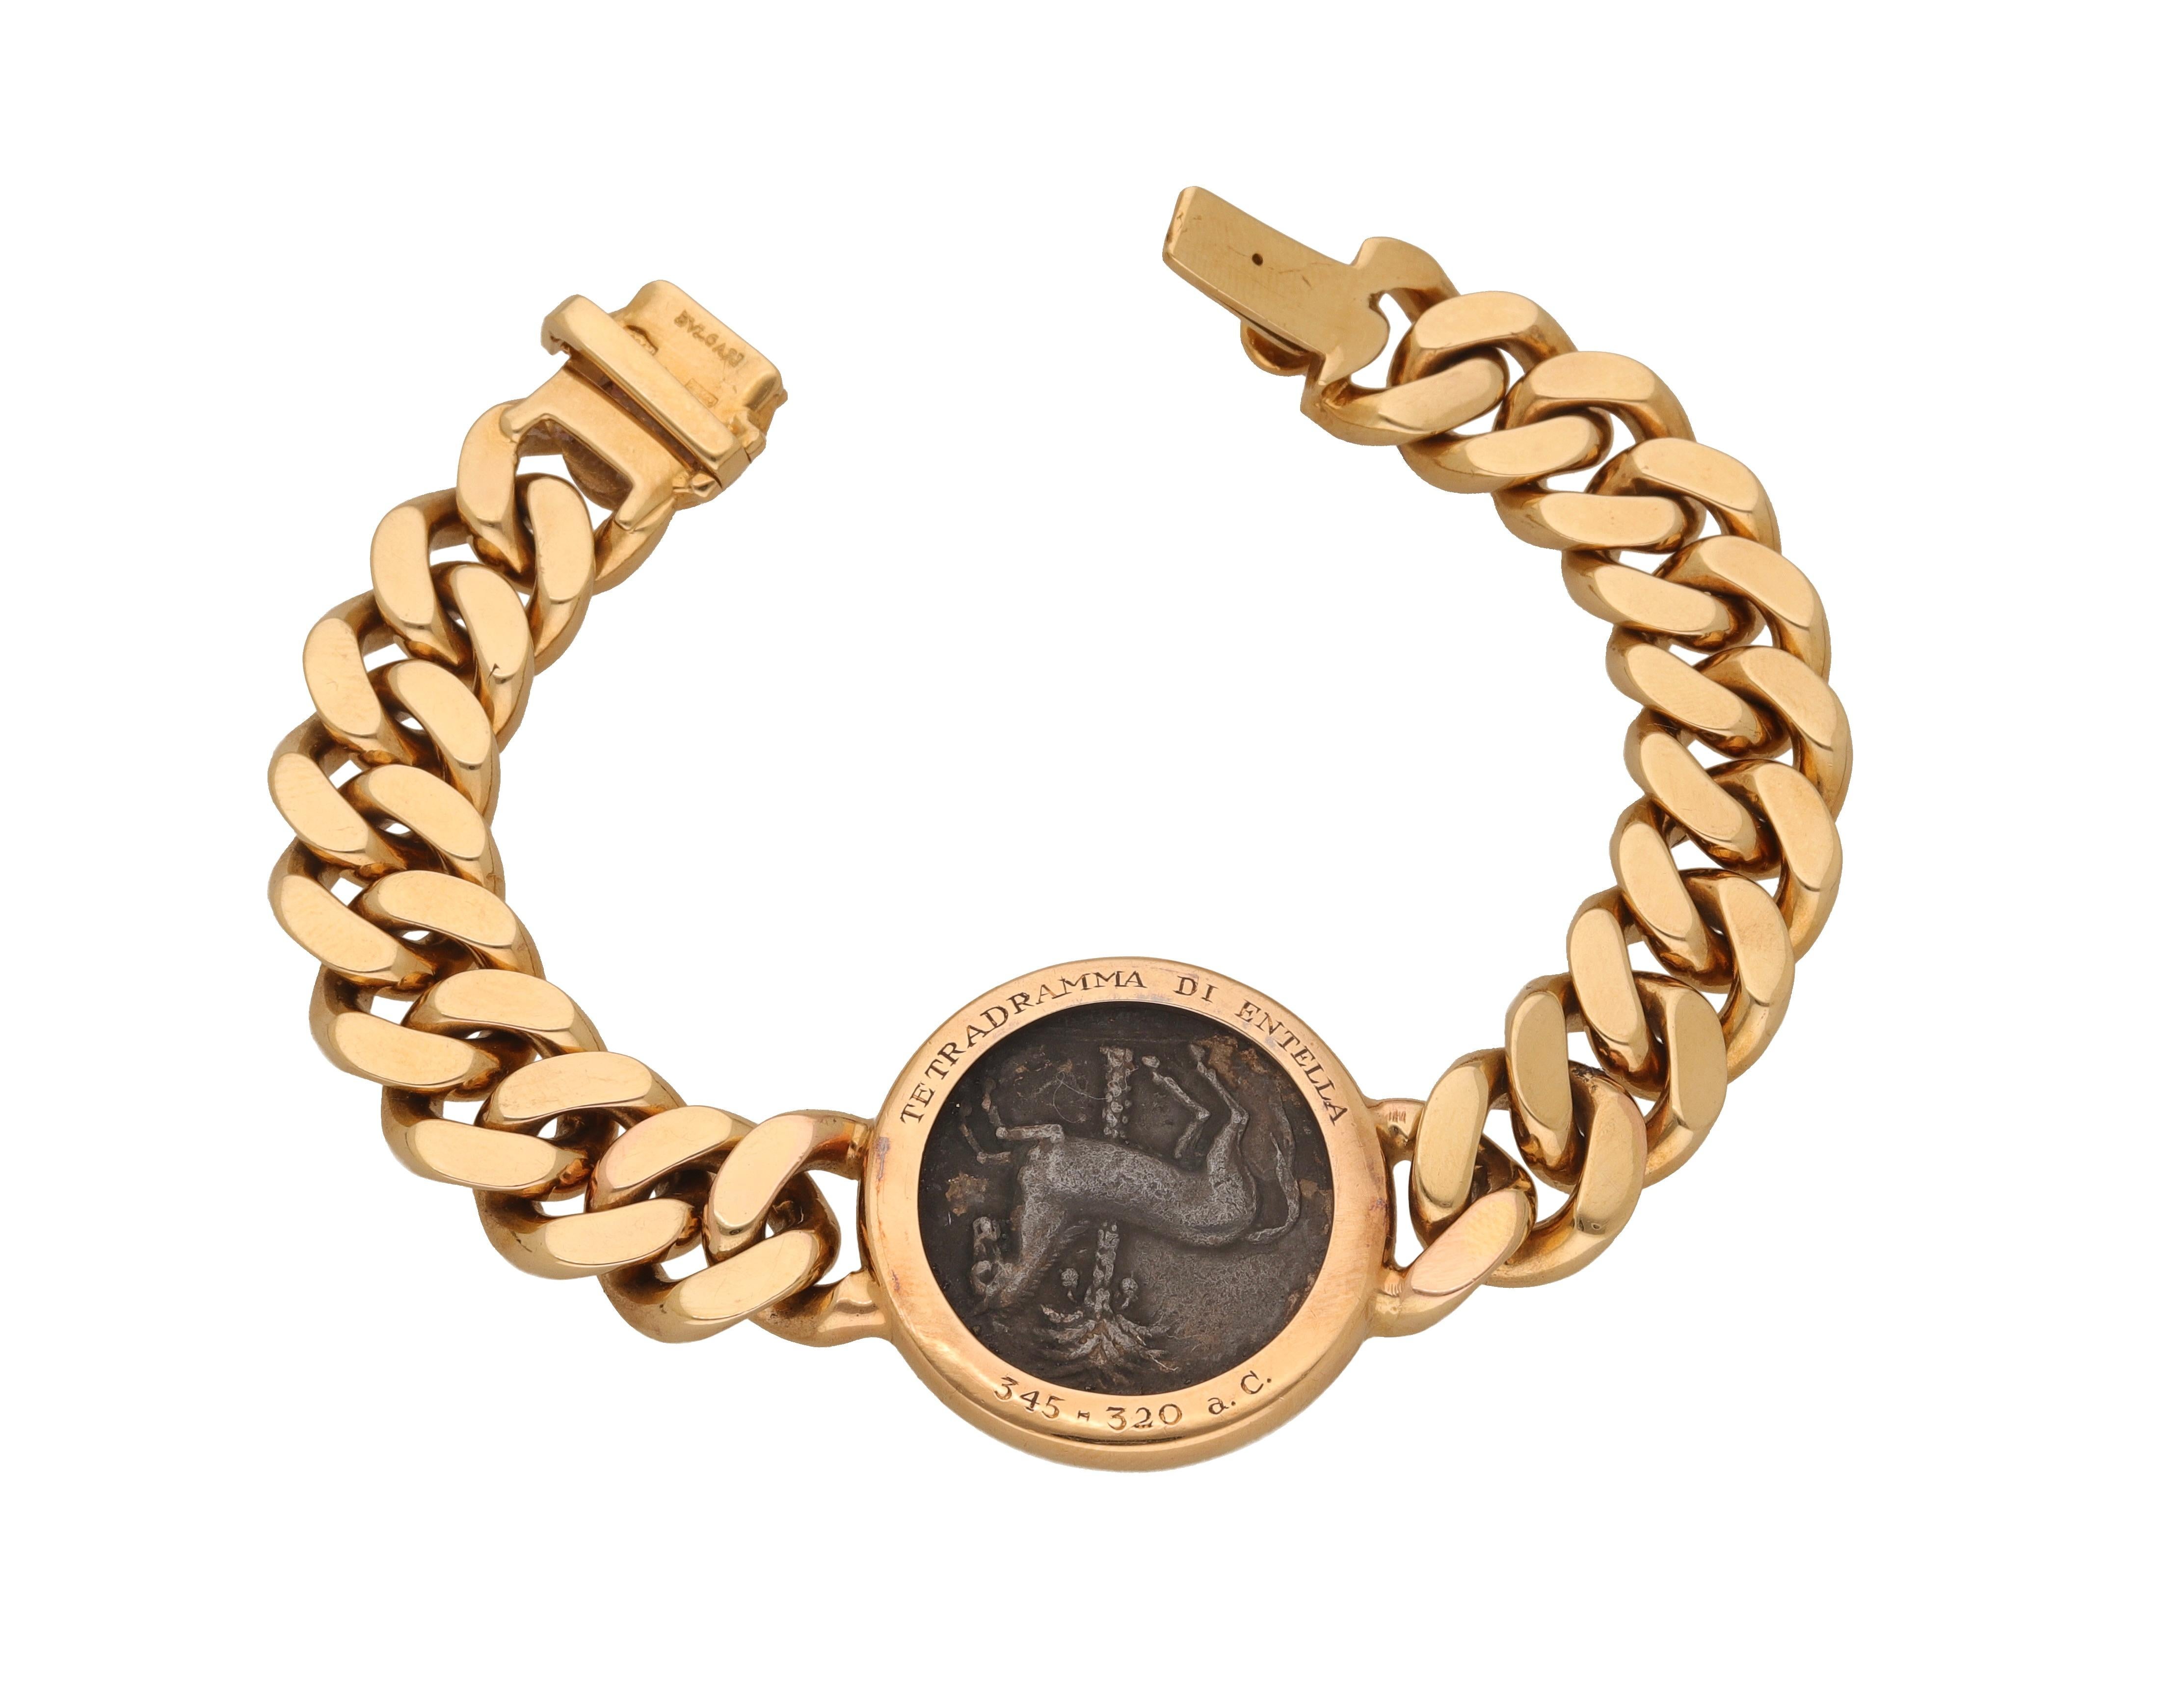 18 kt. gold bracelet with antique coin signed Bulgari, from the MONETE collection.
The bracelet is made of yellow gold groumette links with an antique silver coin in the center depicting on the front the head of Arethusa, on the back a prancing